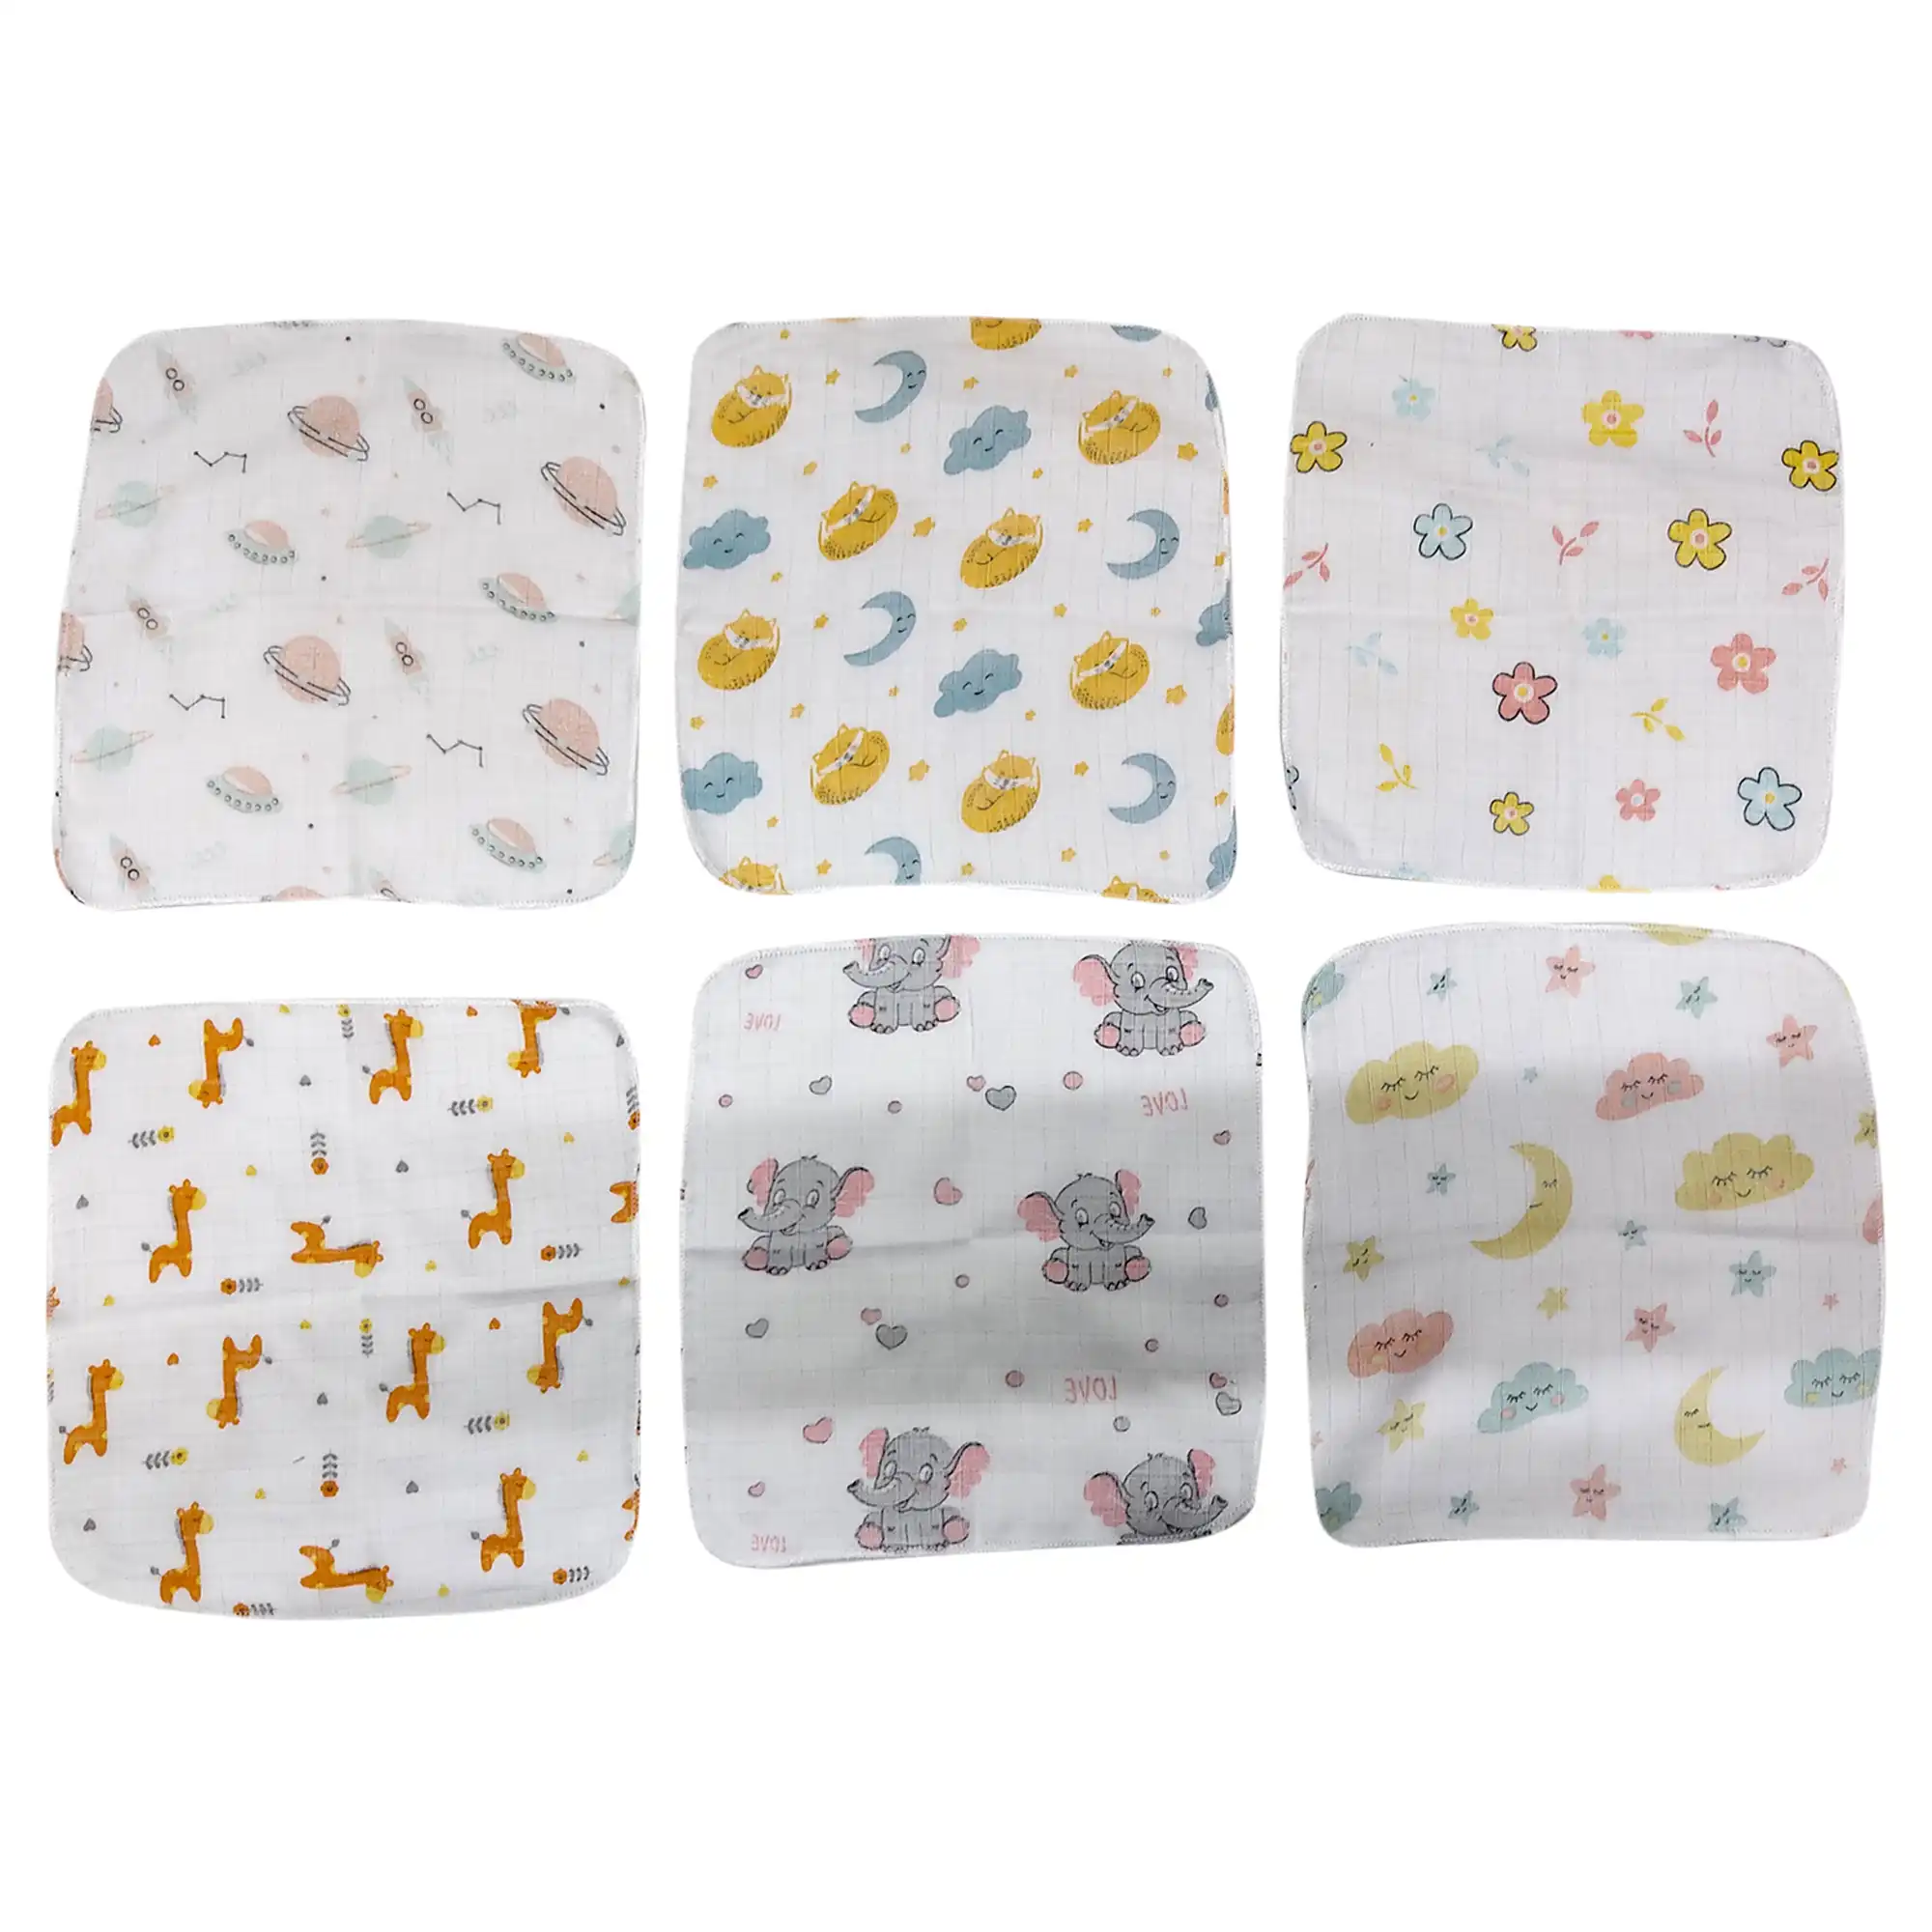 Love Baby 2 Layer Muslin Cotton Extra Soft Quick Absorbing Washcloth Reusable Face Towels Hankies Printed Napkin Set for Babies Infants Kids – WCM42 Combo P3 5